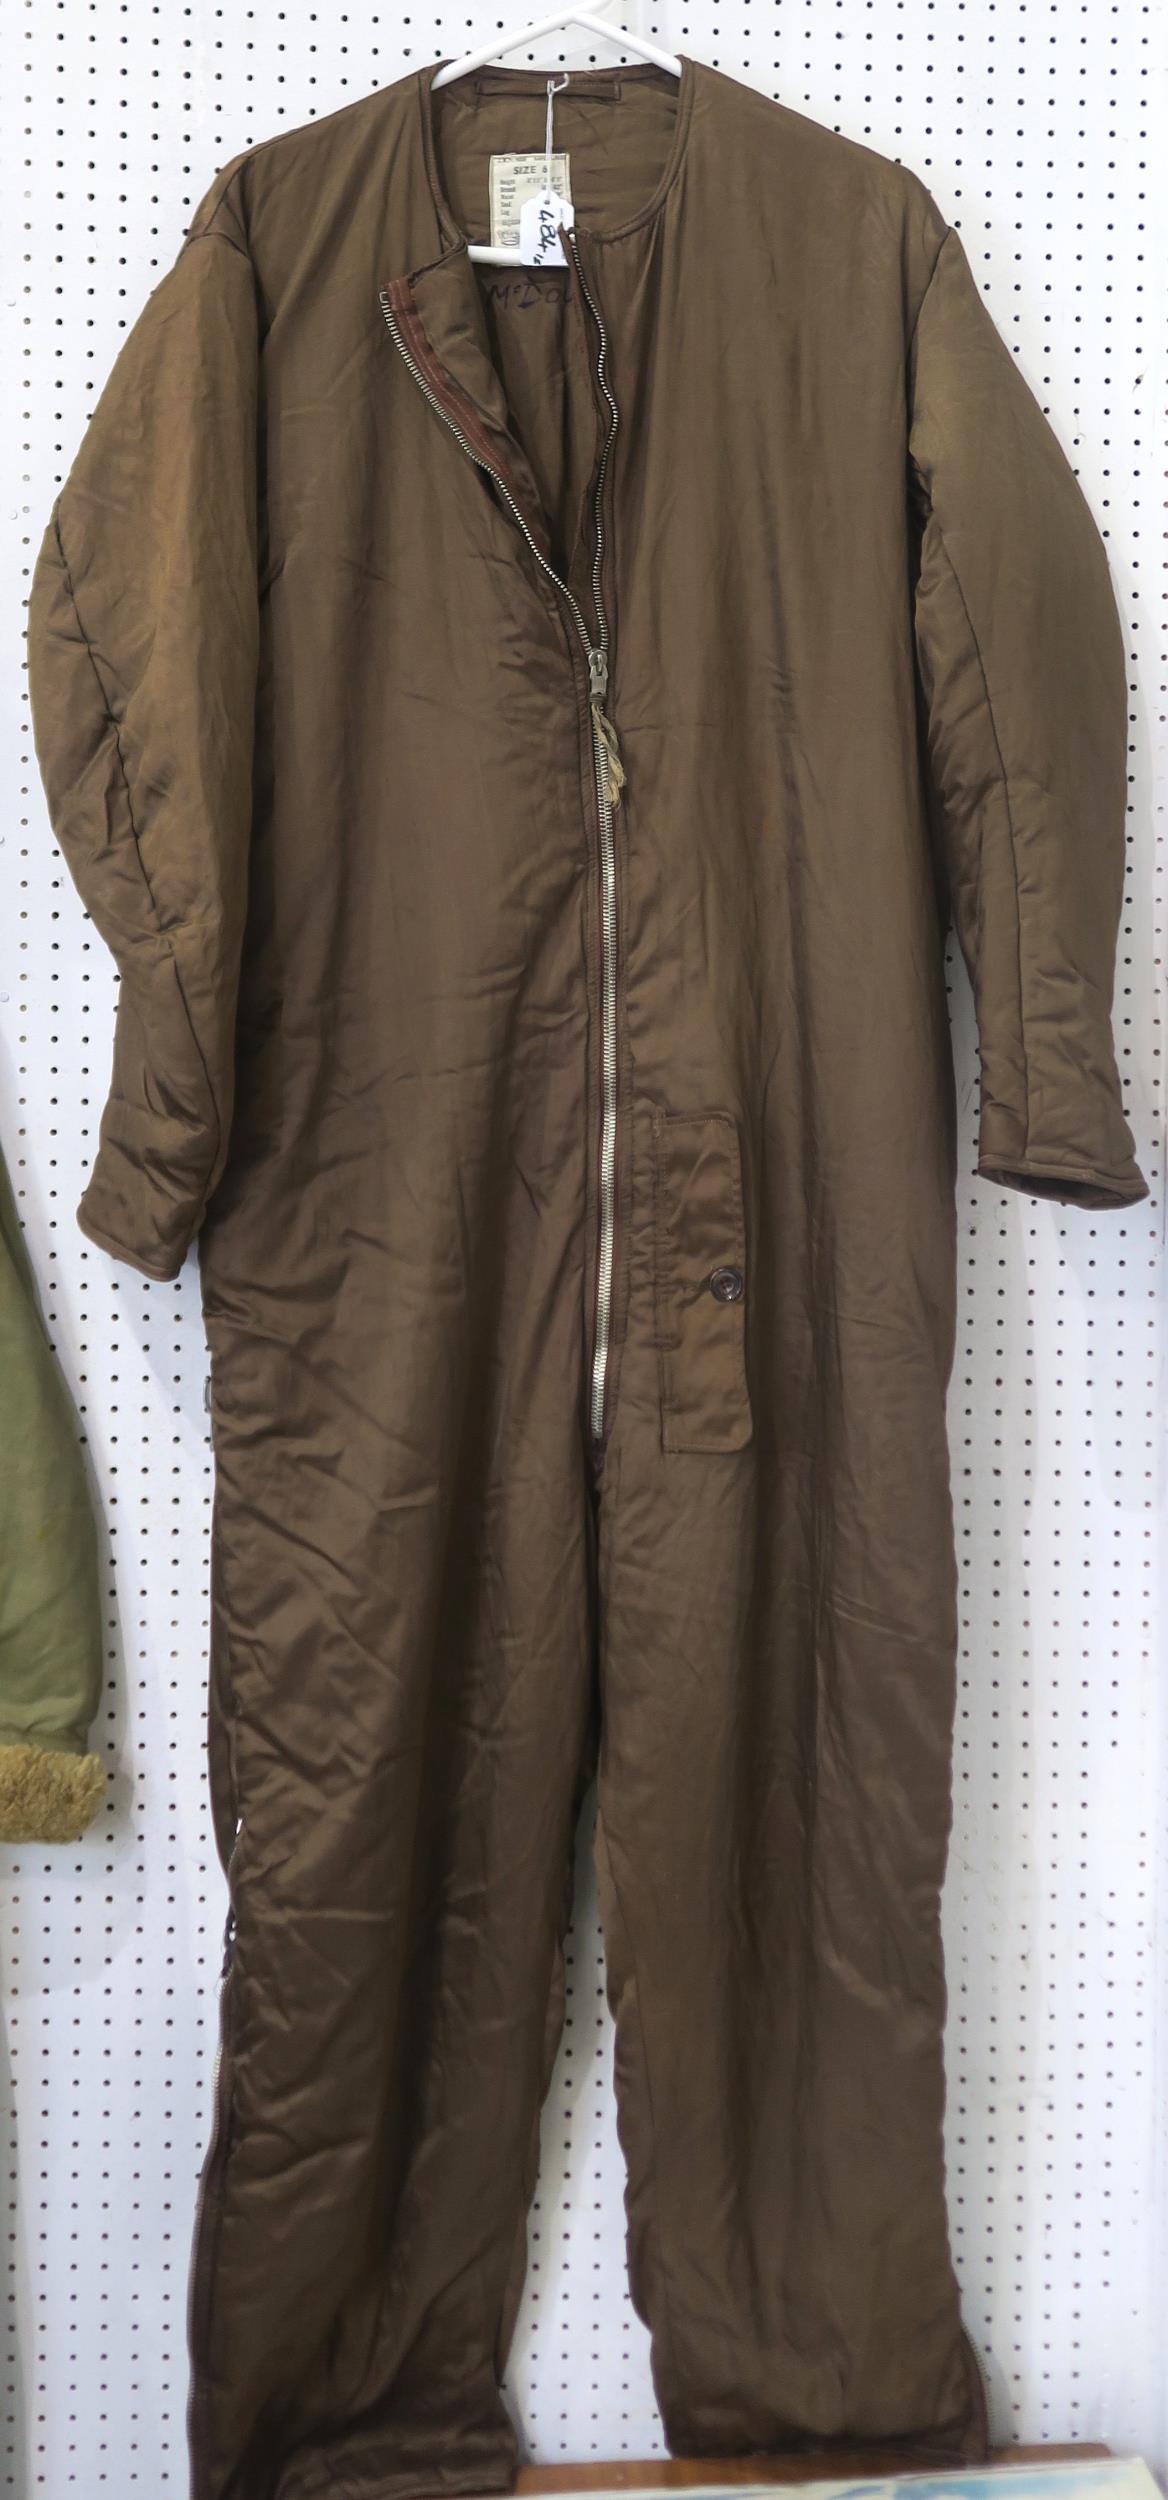 A WW2 RAF 1940 pattern Sidcot flying suit, size no. 6, with fleece-trimmed cuffs and detachable - Image 3 of 3